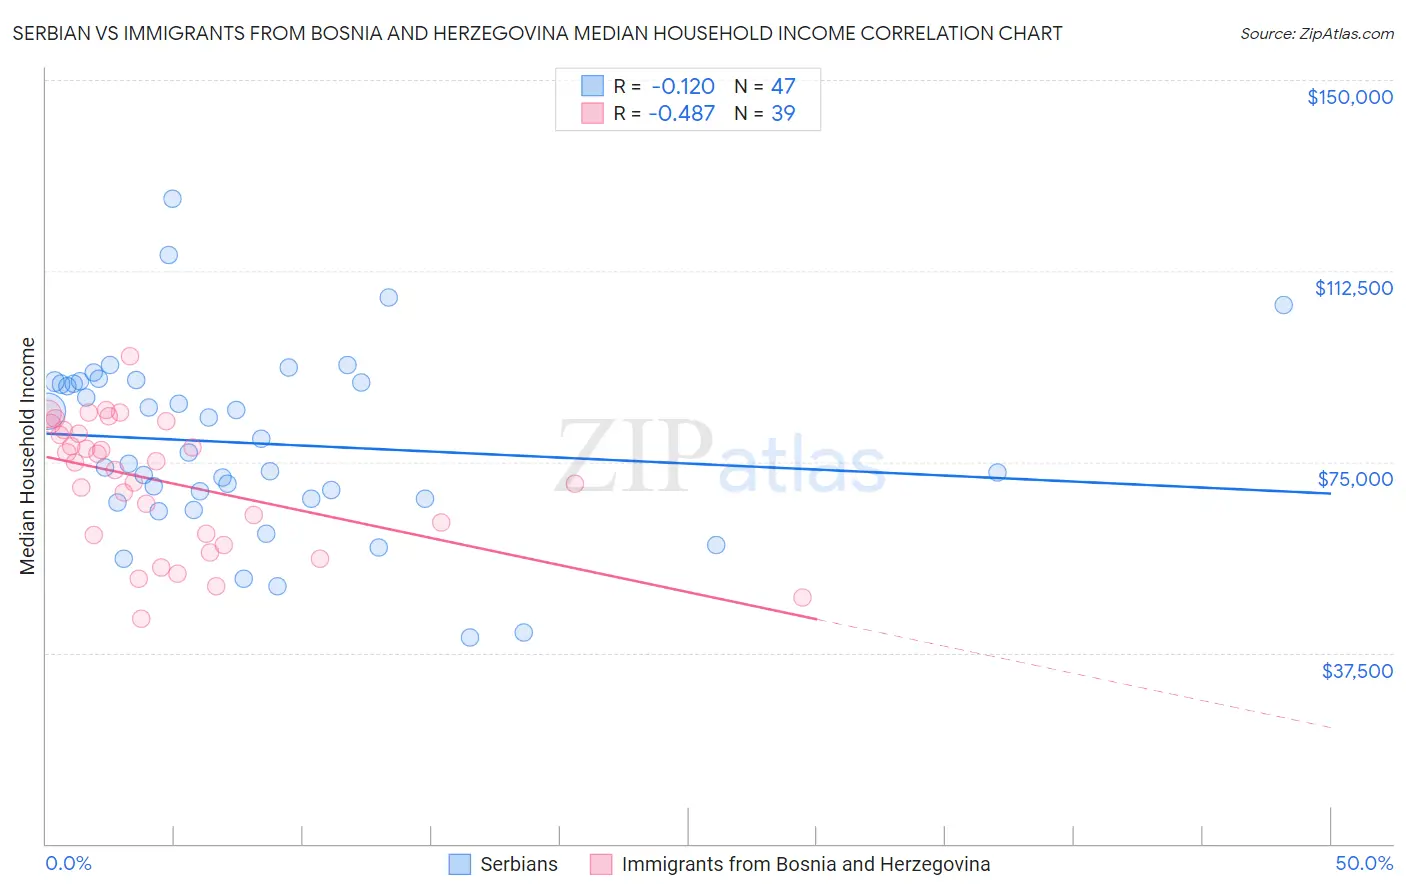 Serbian vs Immigrants from Bosnia and Herzegovina Median Household Income